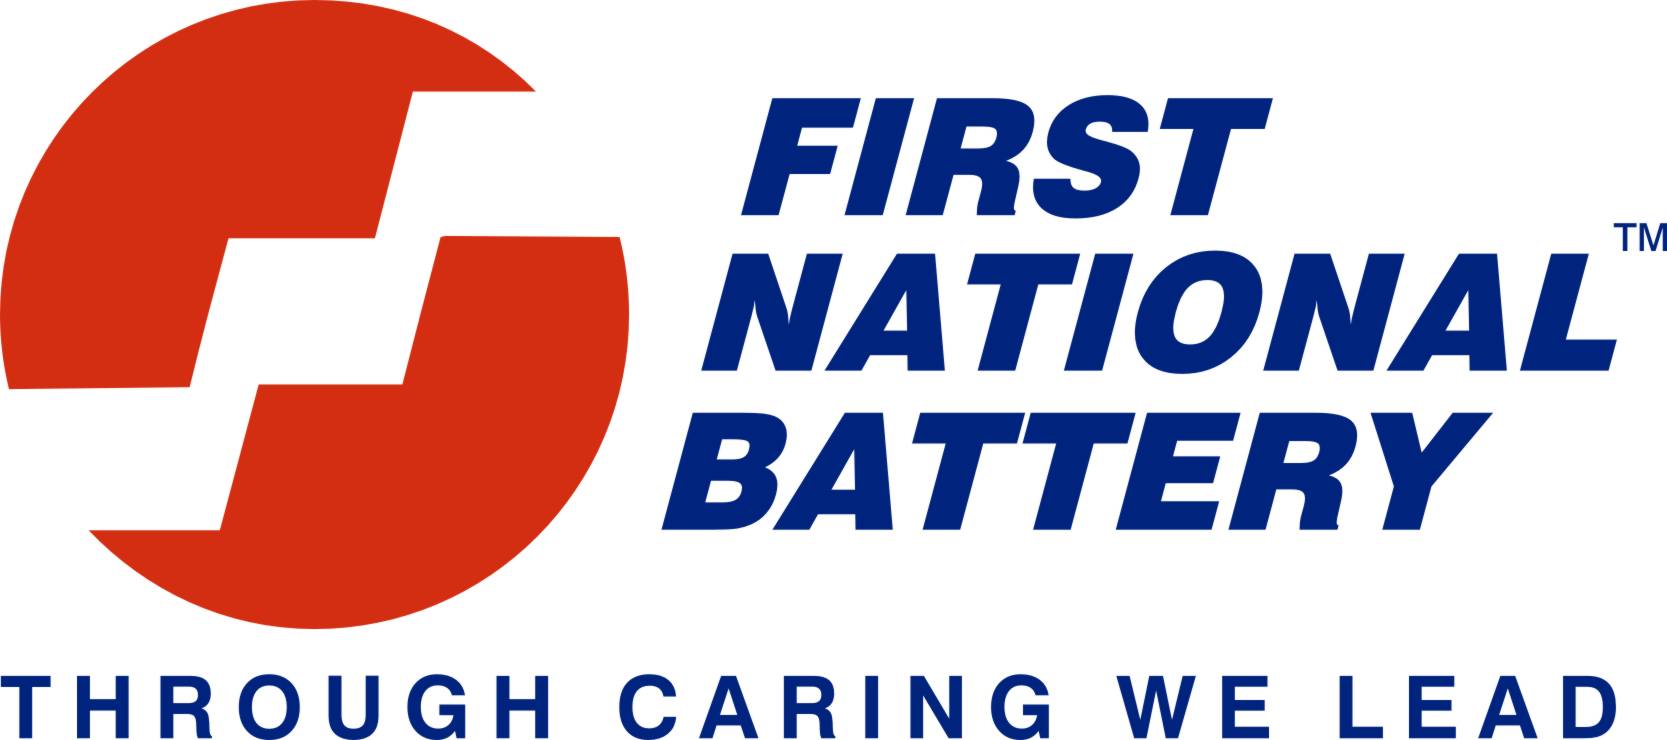 First National Battery a division of Metindustrial (Pty) Ltd (Unverified) logo